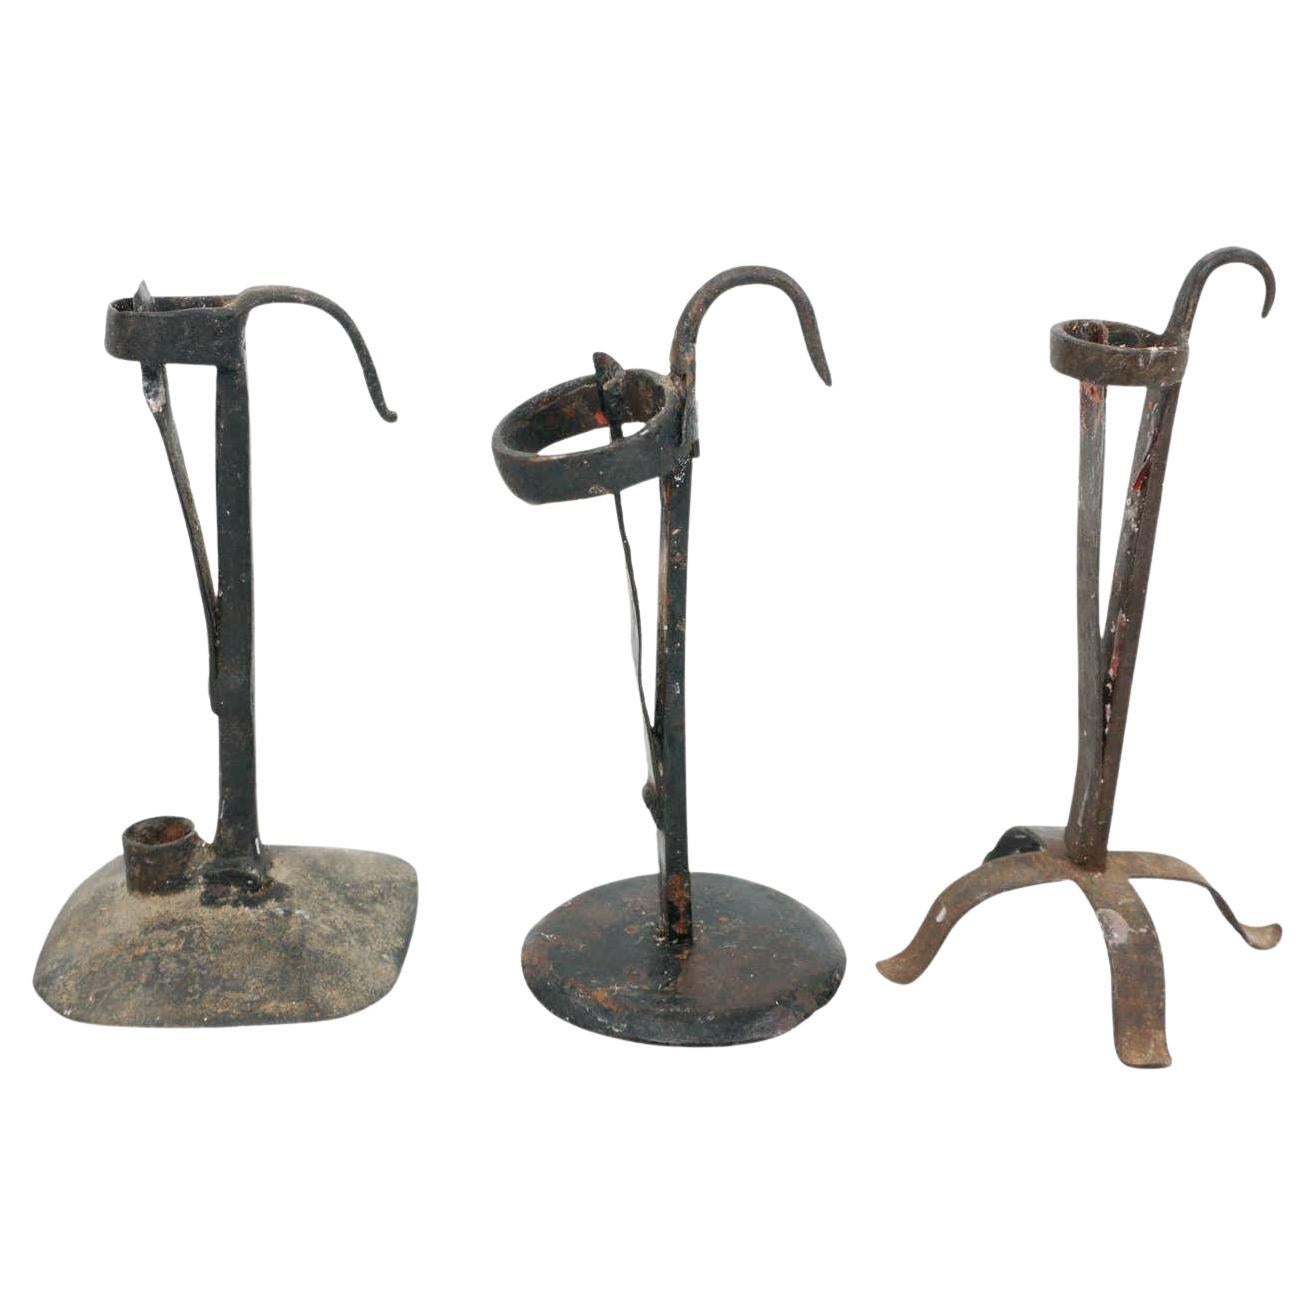 Set of Three Rustic Metal Candle Holders, circa 1930